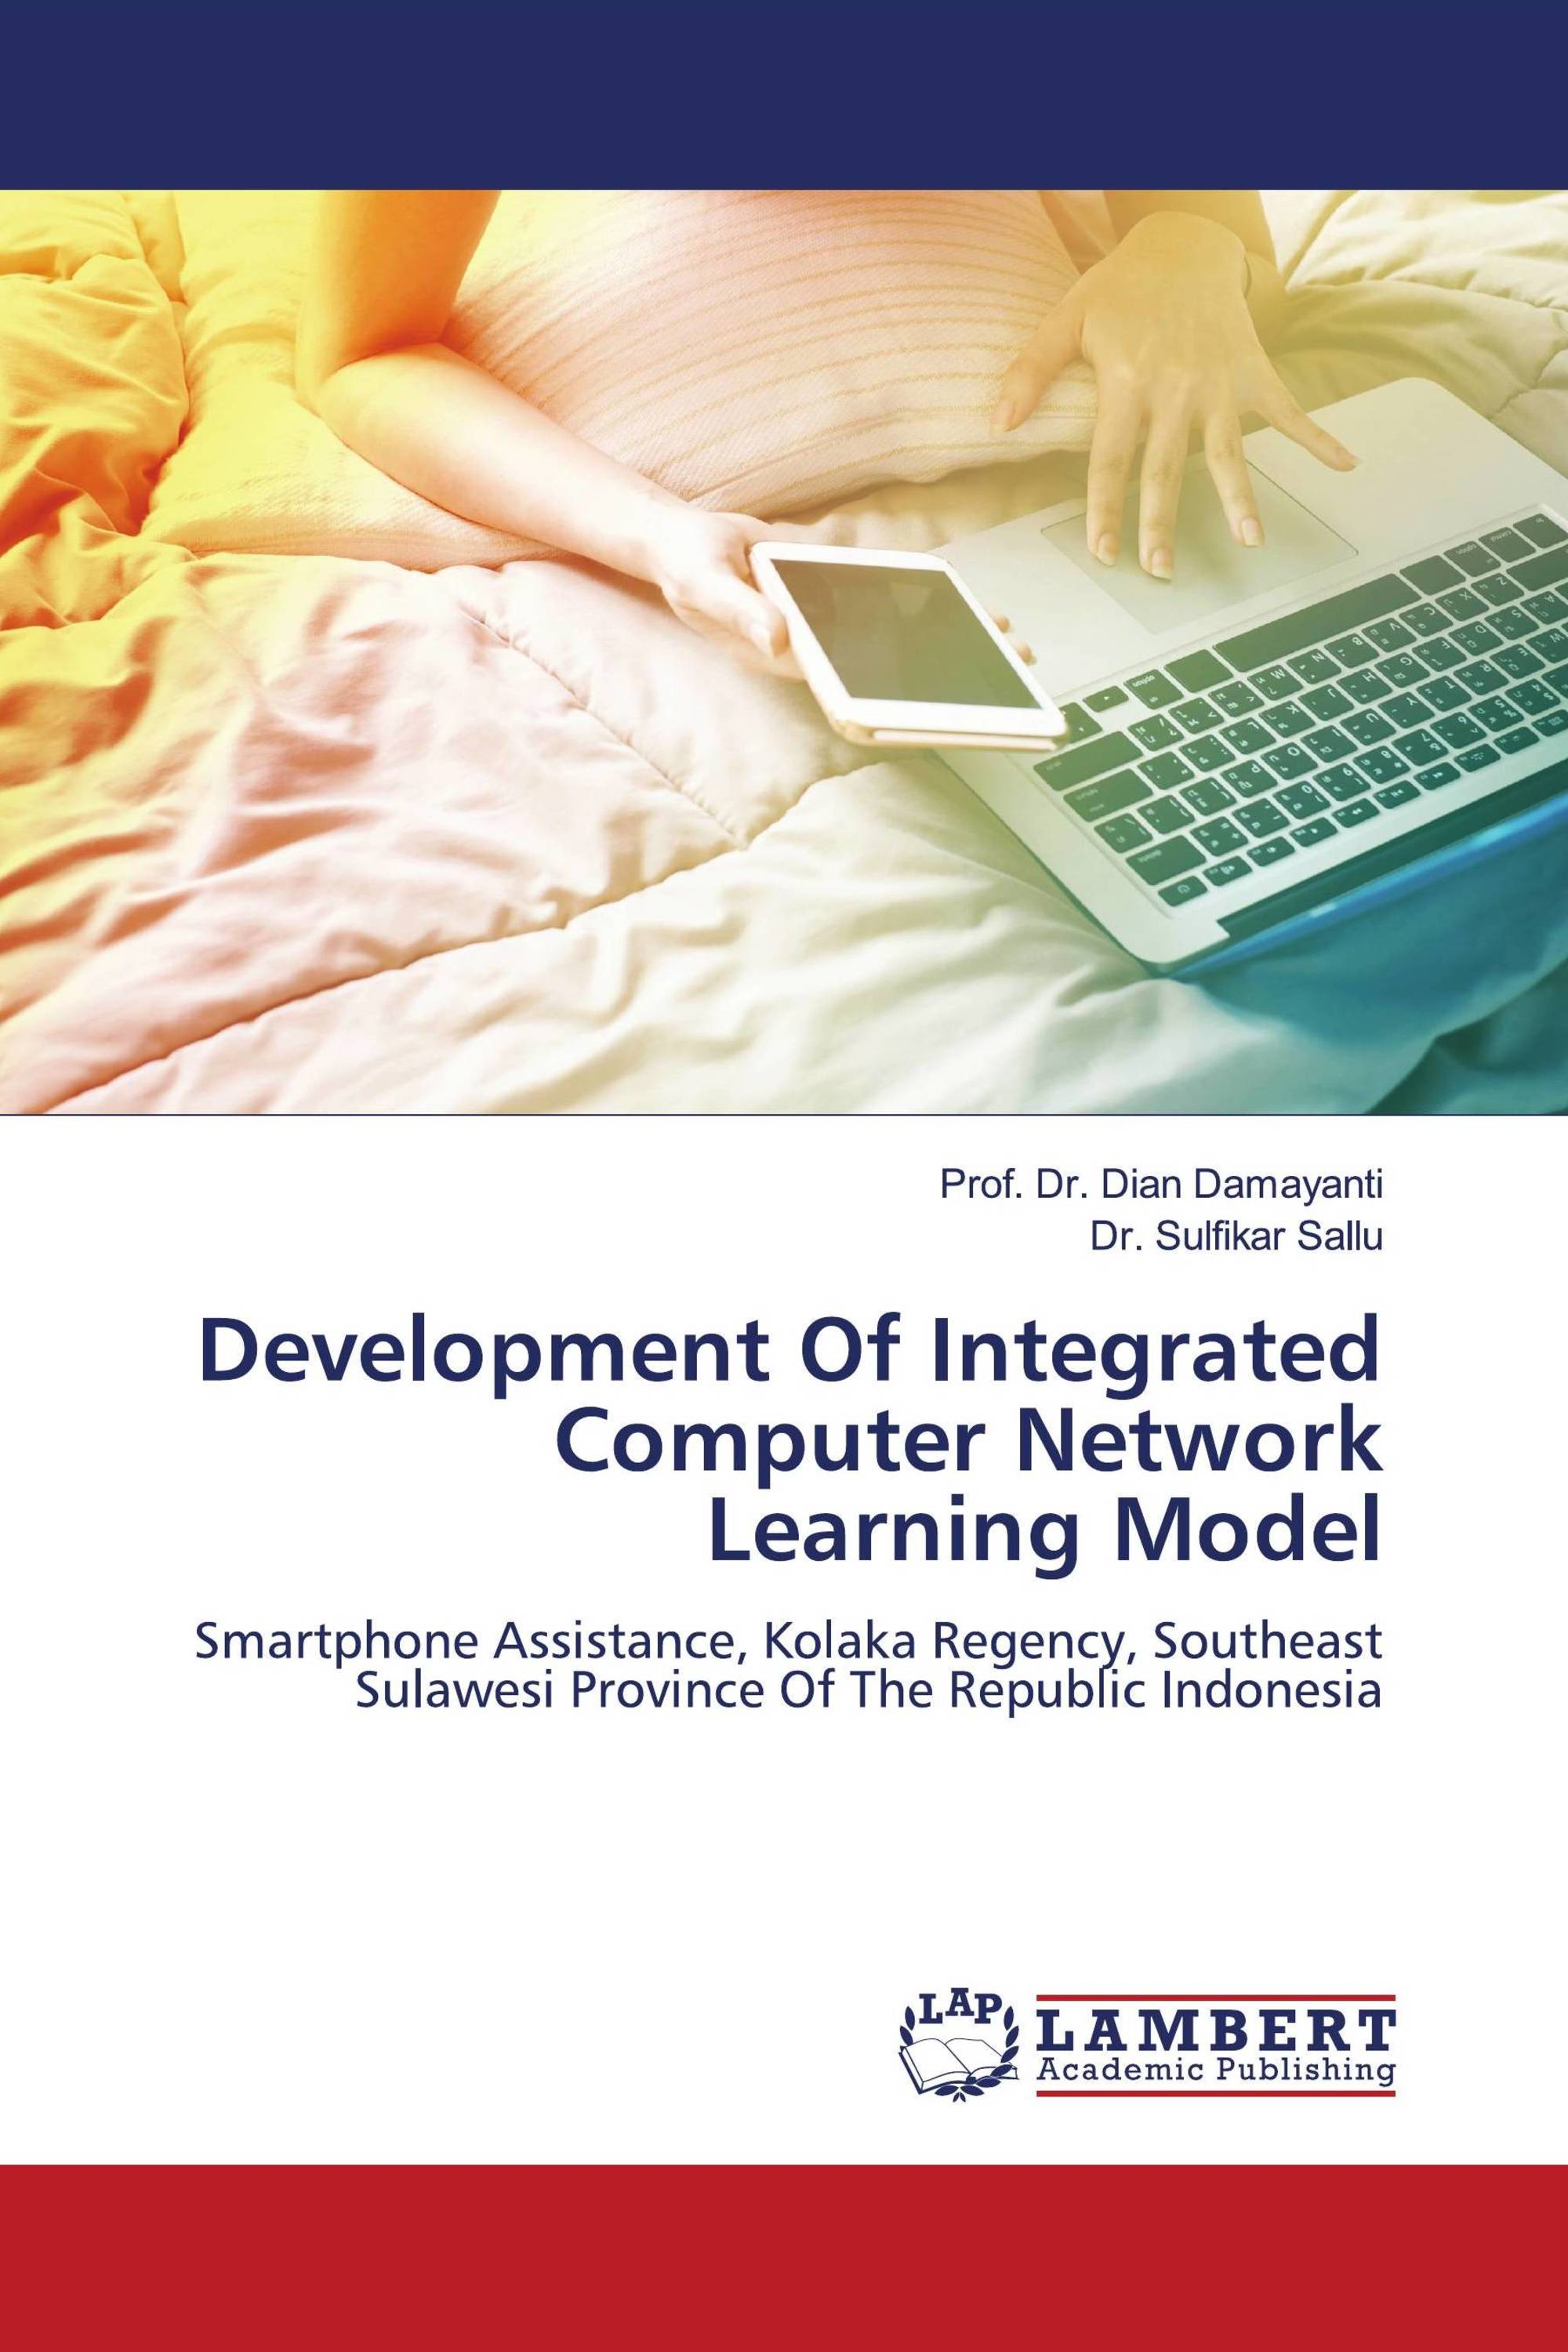 Development Of Integrated Computer Network Learning Model